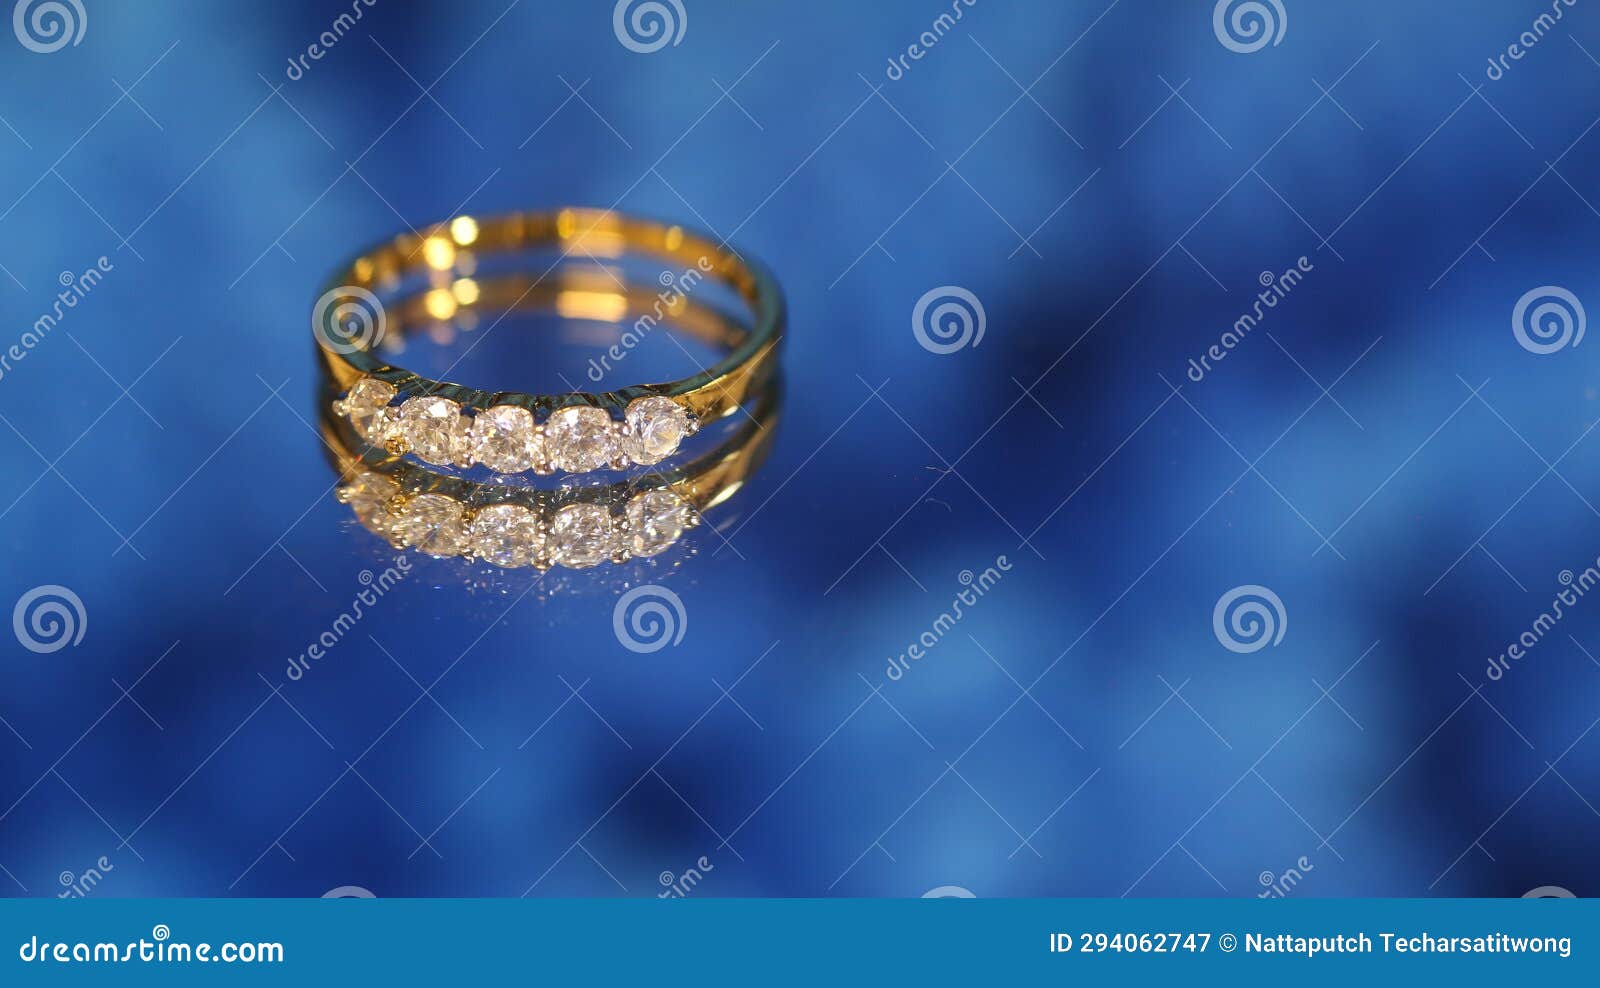 40+ Diamond Ring Isolated Stock Videos and Royalty-Free Footage - iStock |  Wedding ring, Engagement ring, Diamond ring nobody